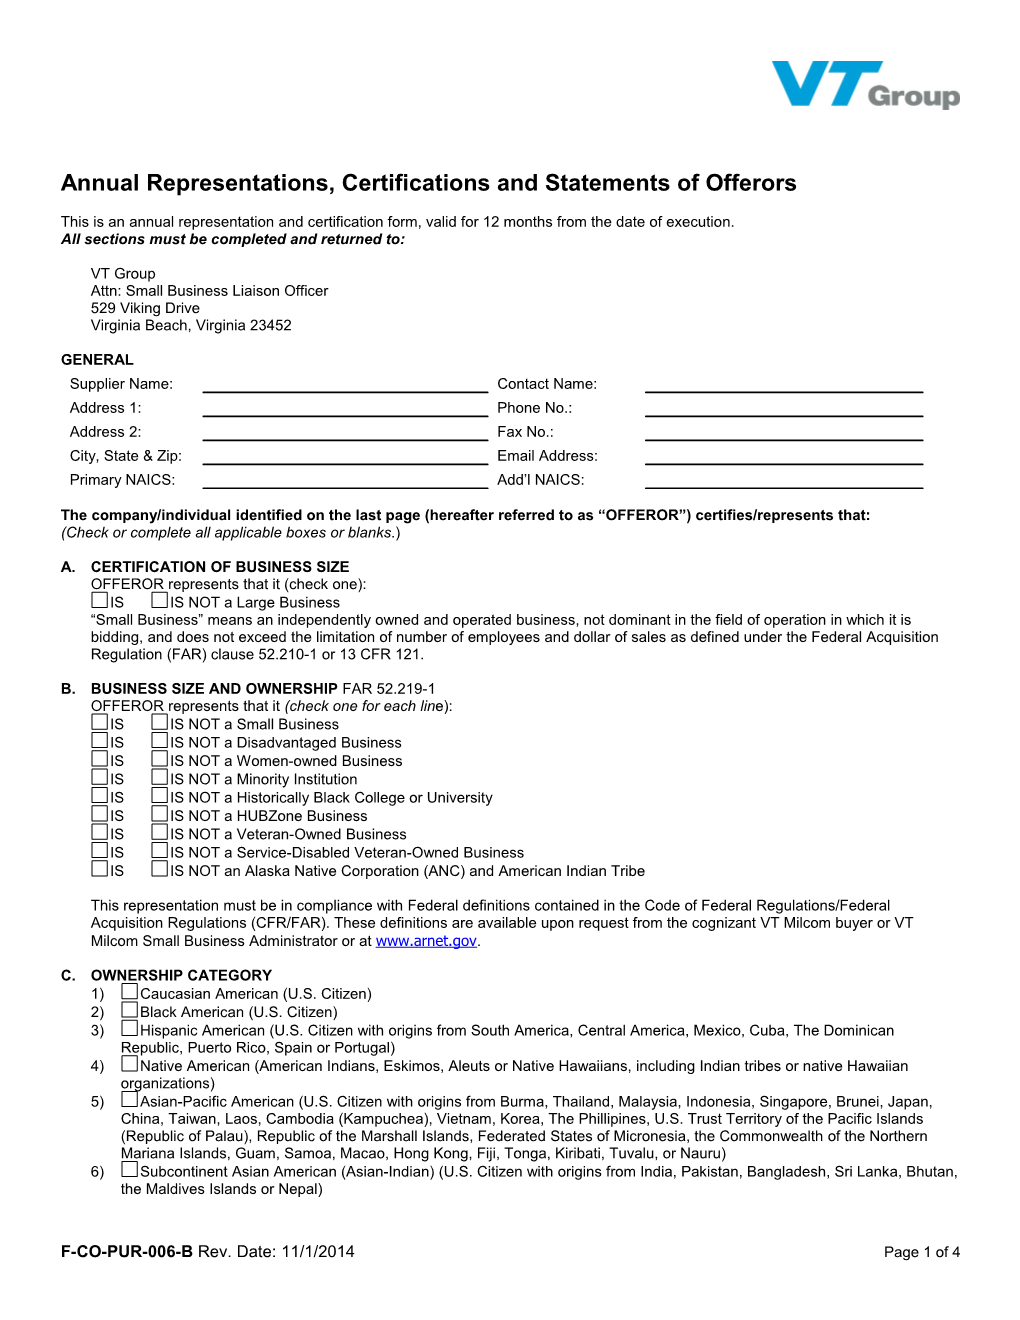 Annual Certifications & Representations